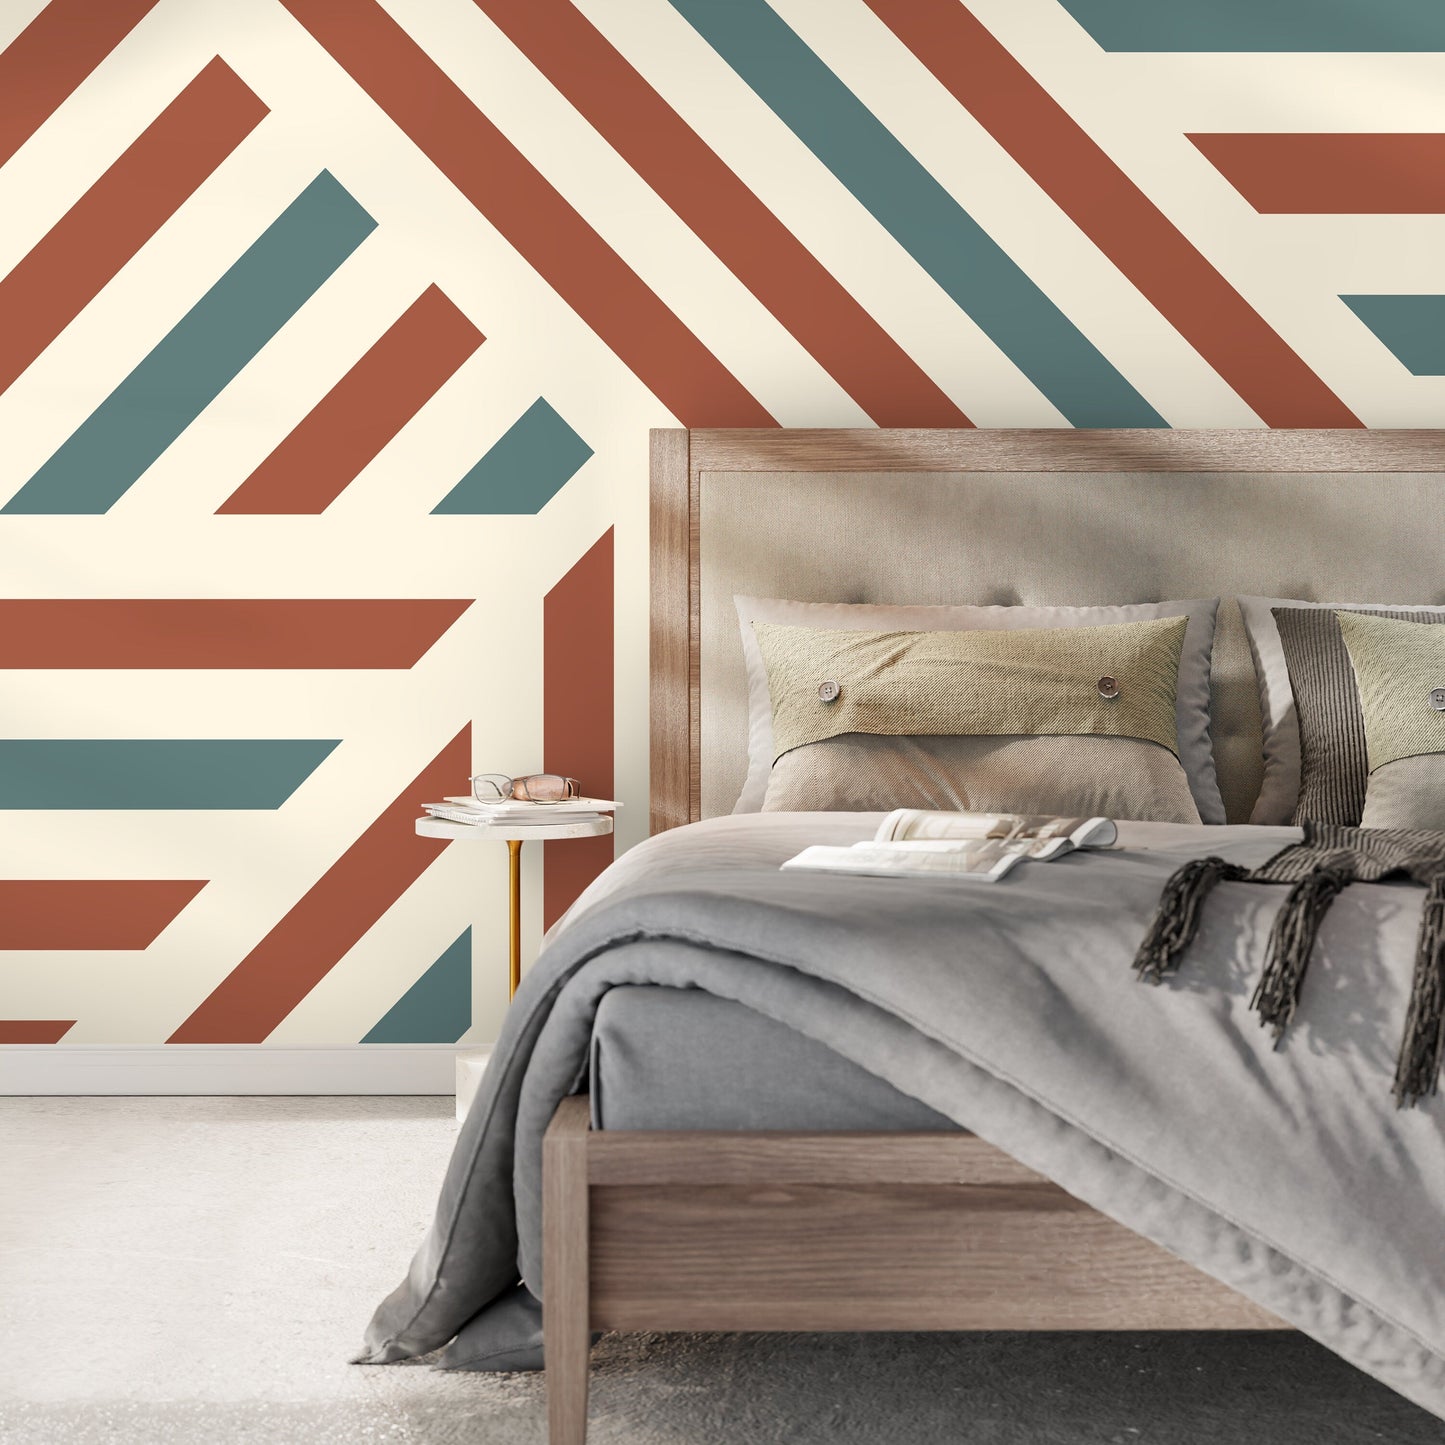 Striped Geometric Wallpaper Modern Wallpaper Peel and Stick and Traditional Wallpaper - D733